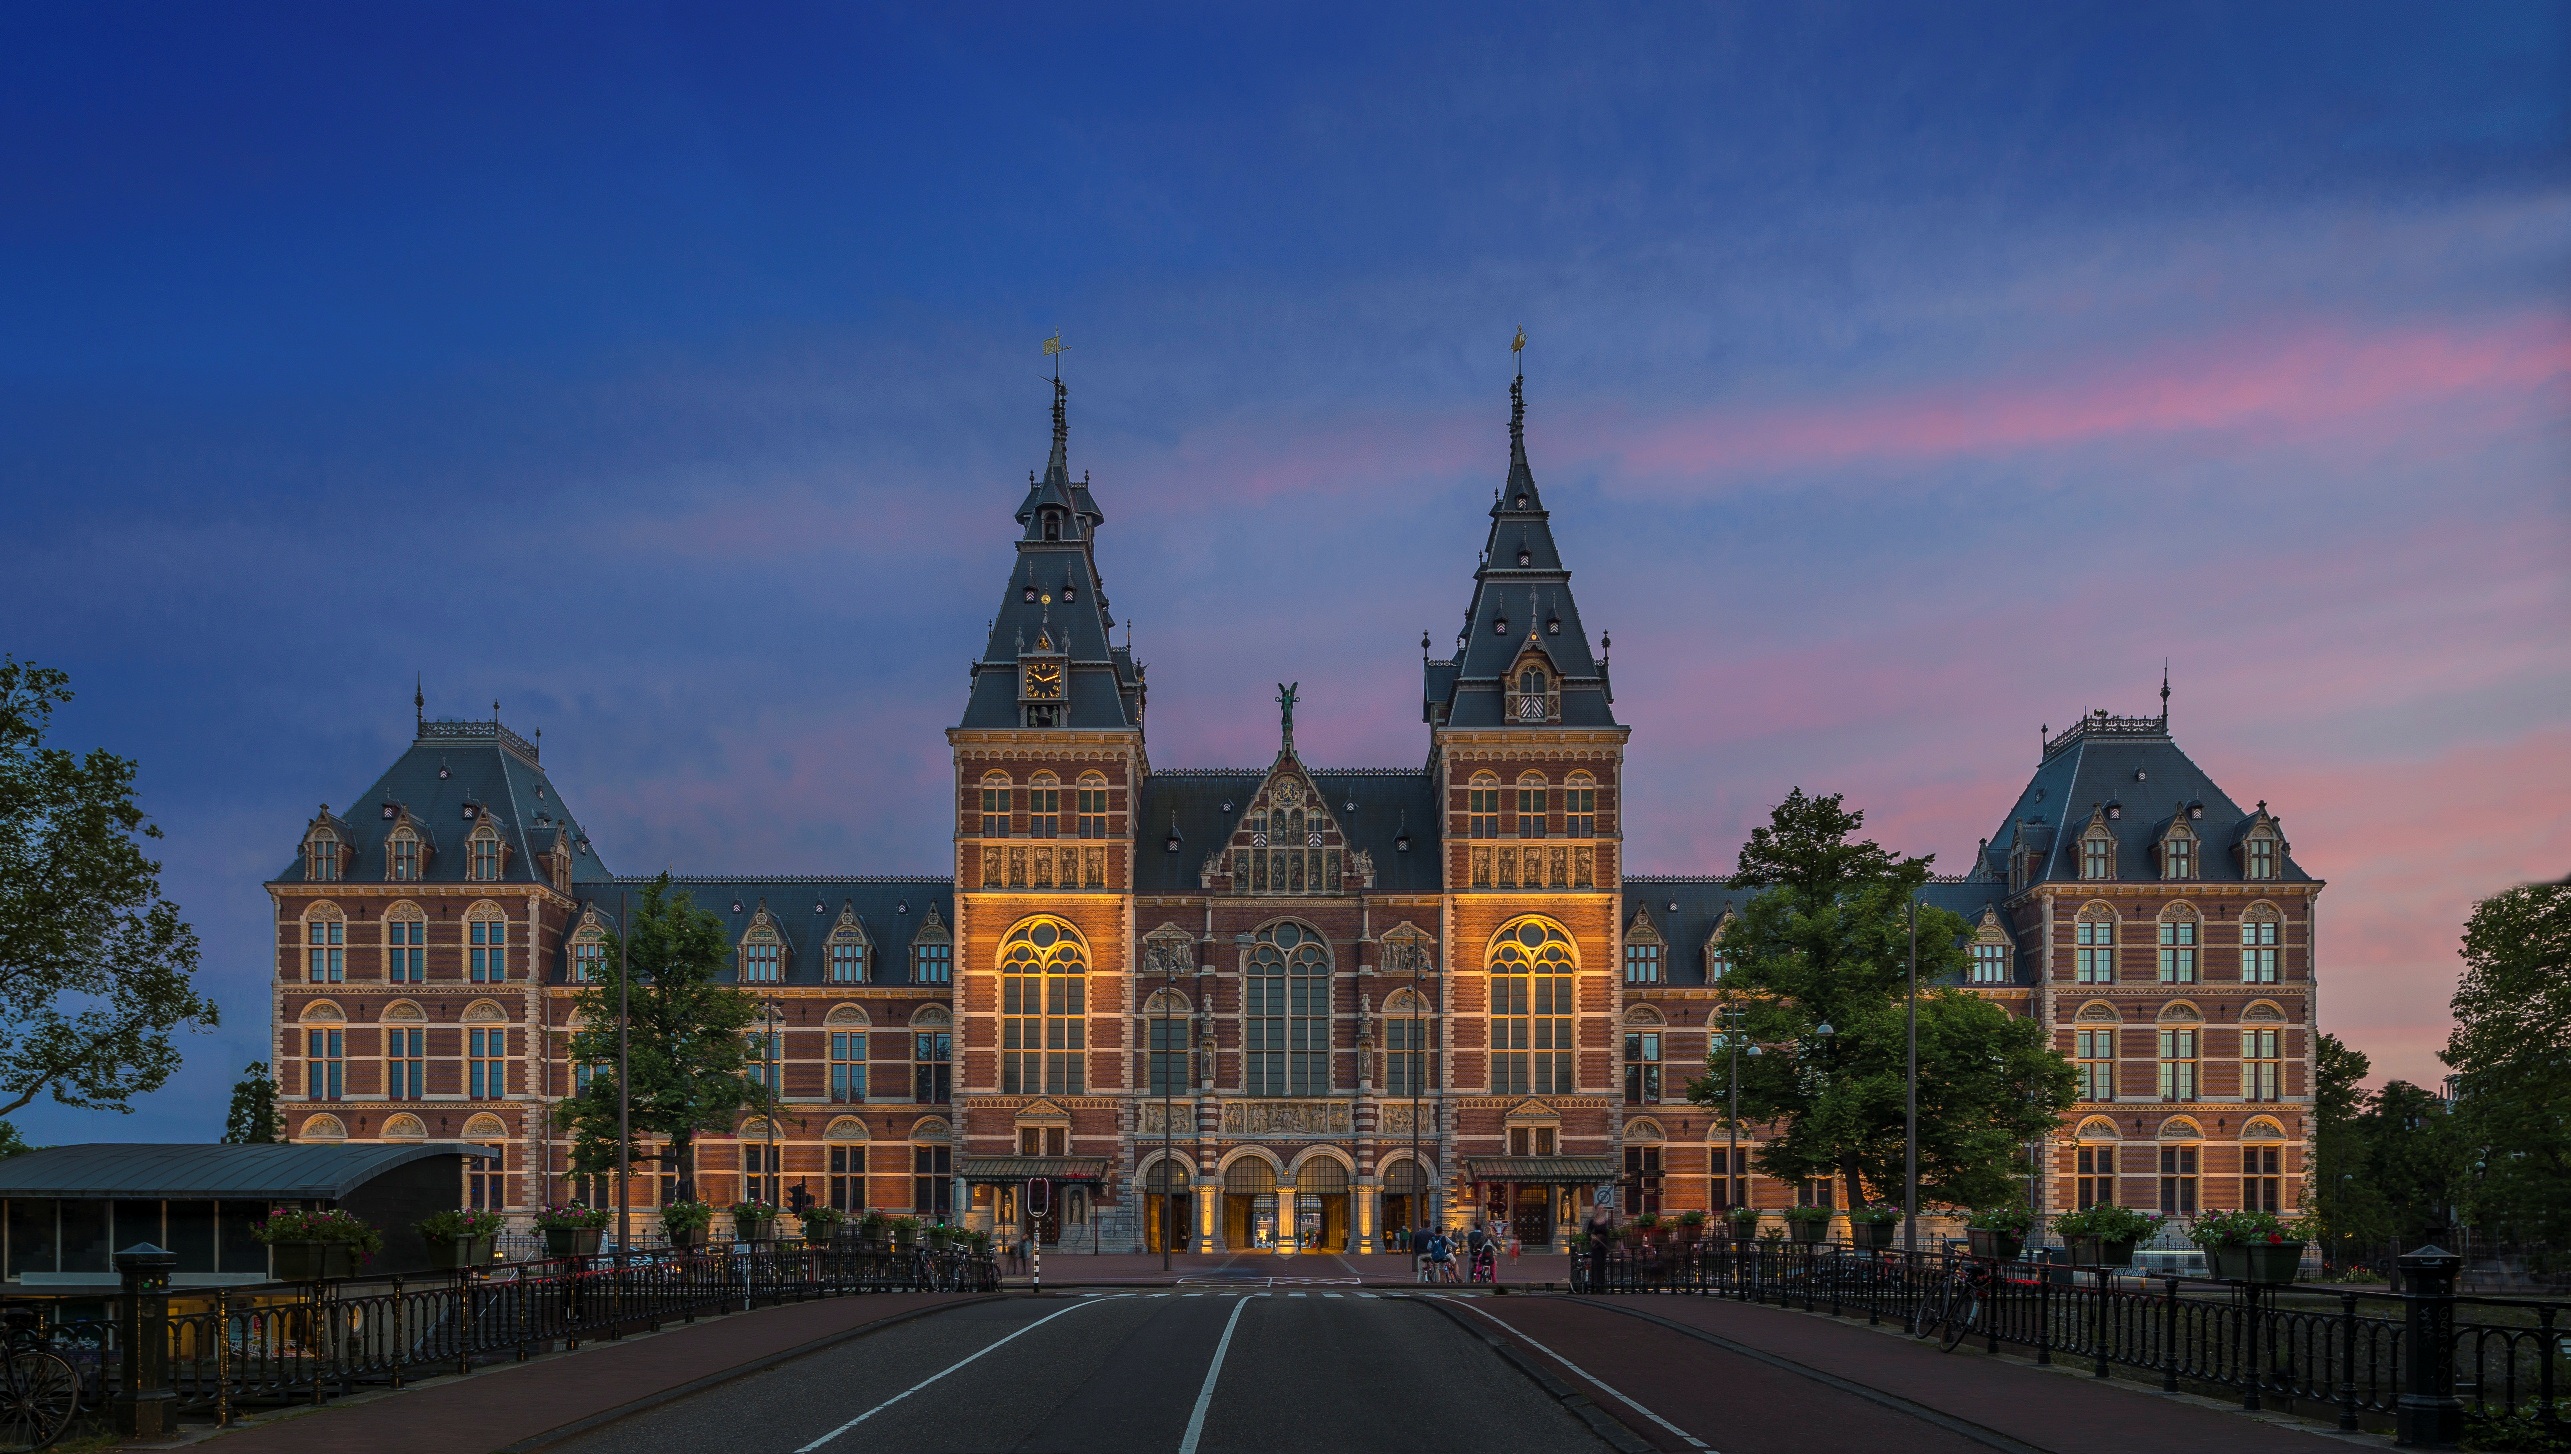 Rijksmuseum, The Most Famous Museum in Netherlands